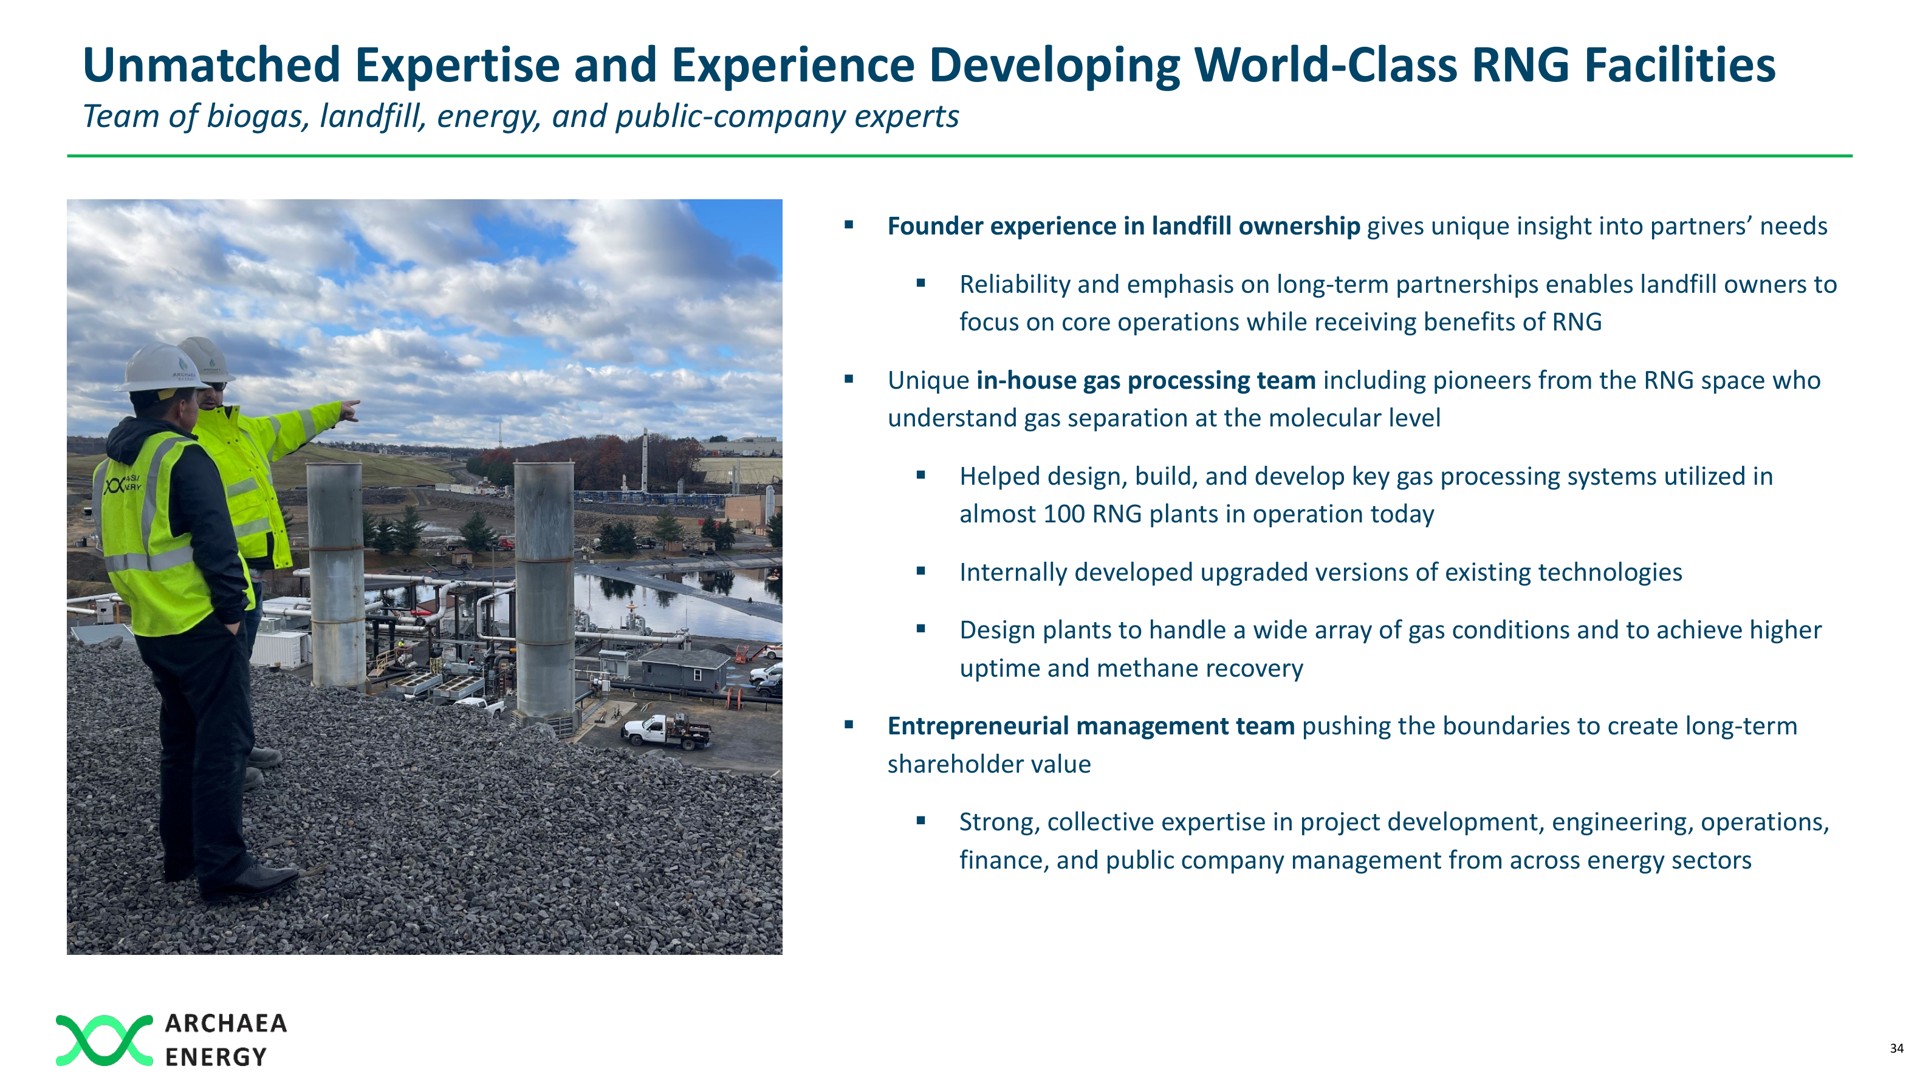 unmatched and experience developing world class facilities | Archaea Energy